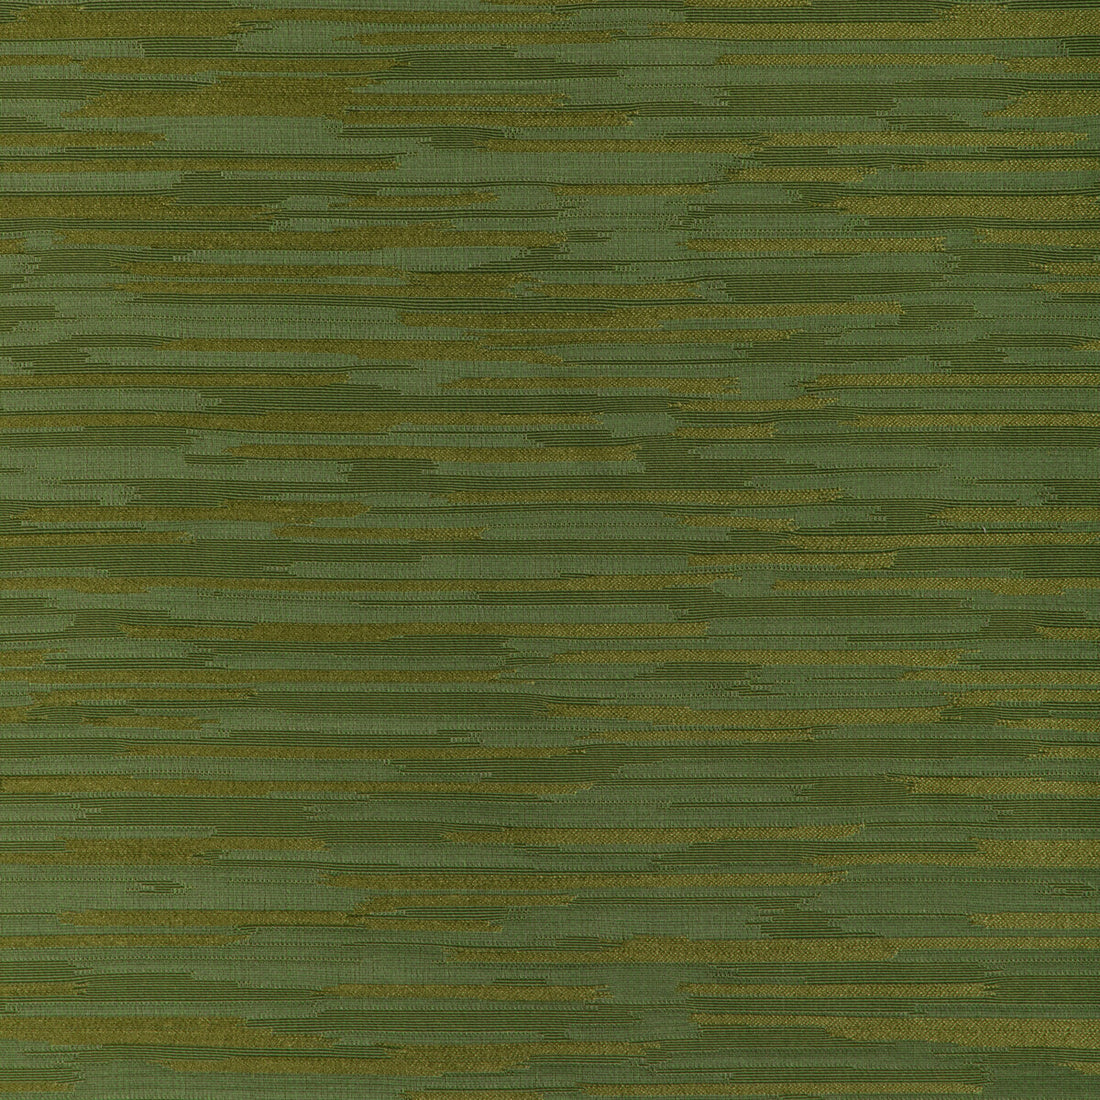 Arles Weave fabric in leaf color - pattern 8023134.33.0 - by Brunschwig &amp; Fils in the Arles Weaves collection